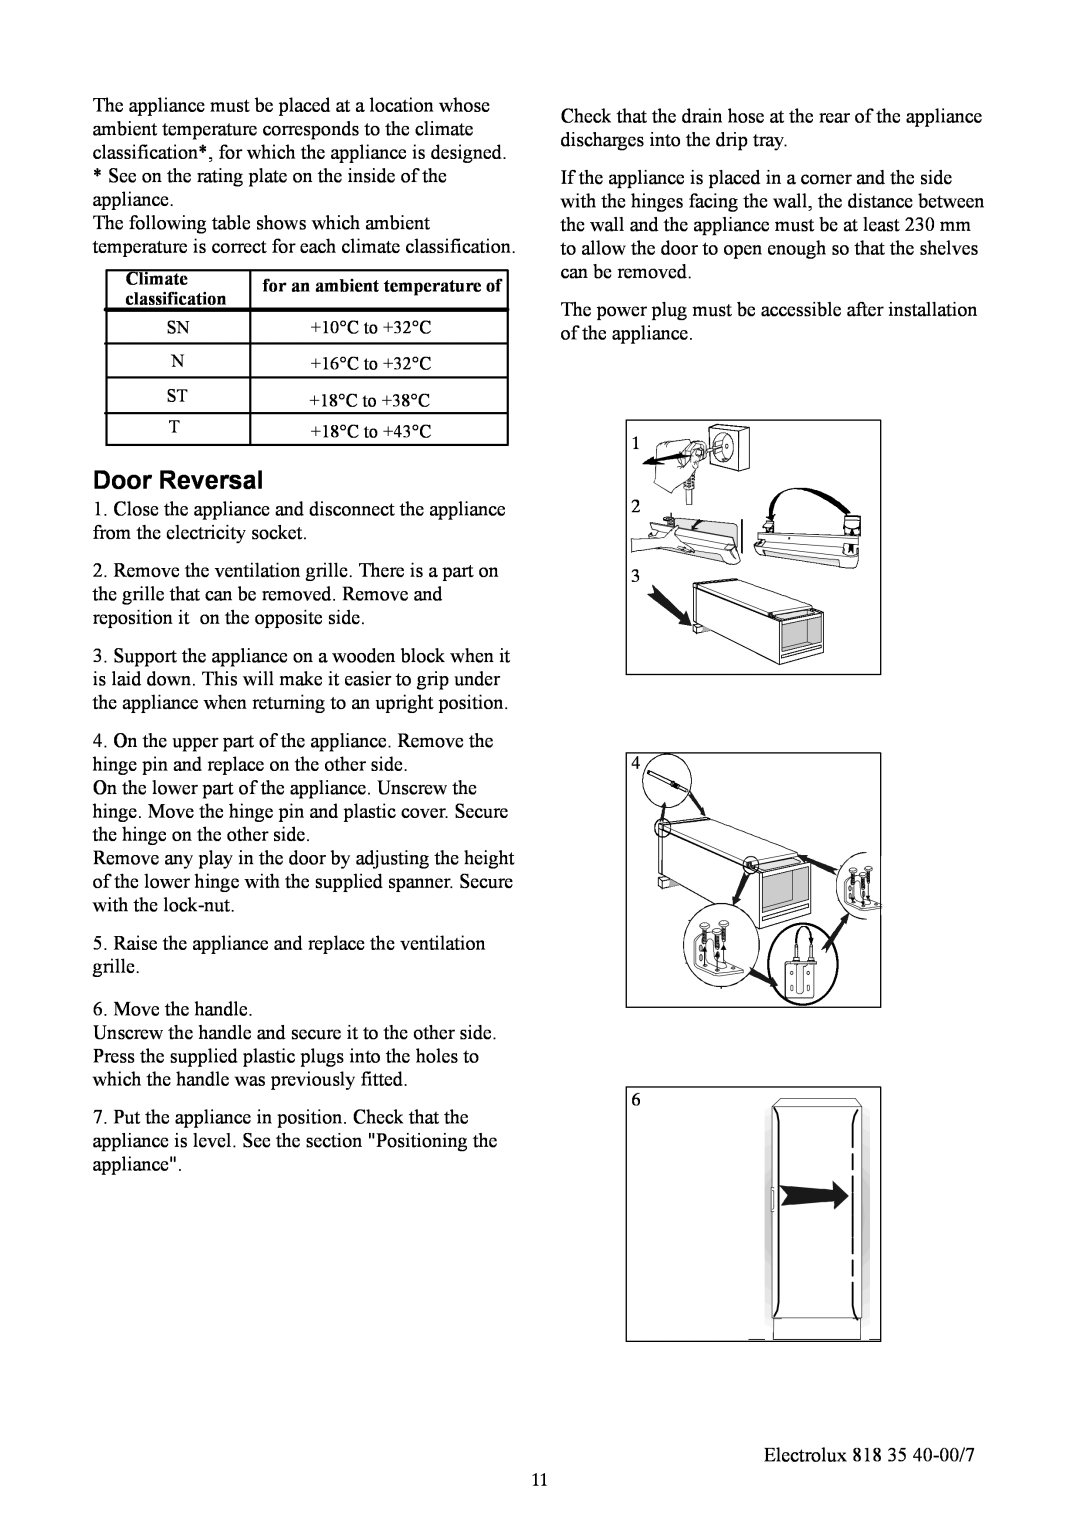 Electrolux ERC3711WS manual Door Reversal, Climate, for an ambient temperature of, classification 